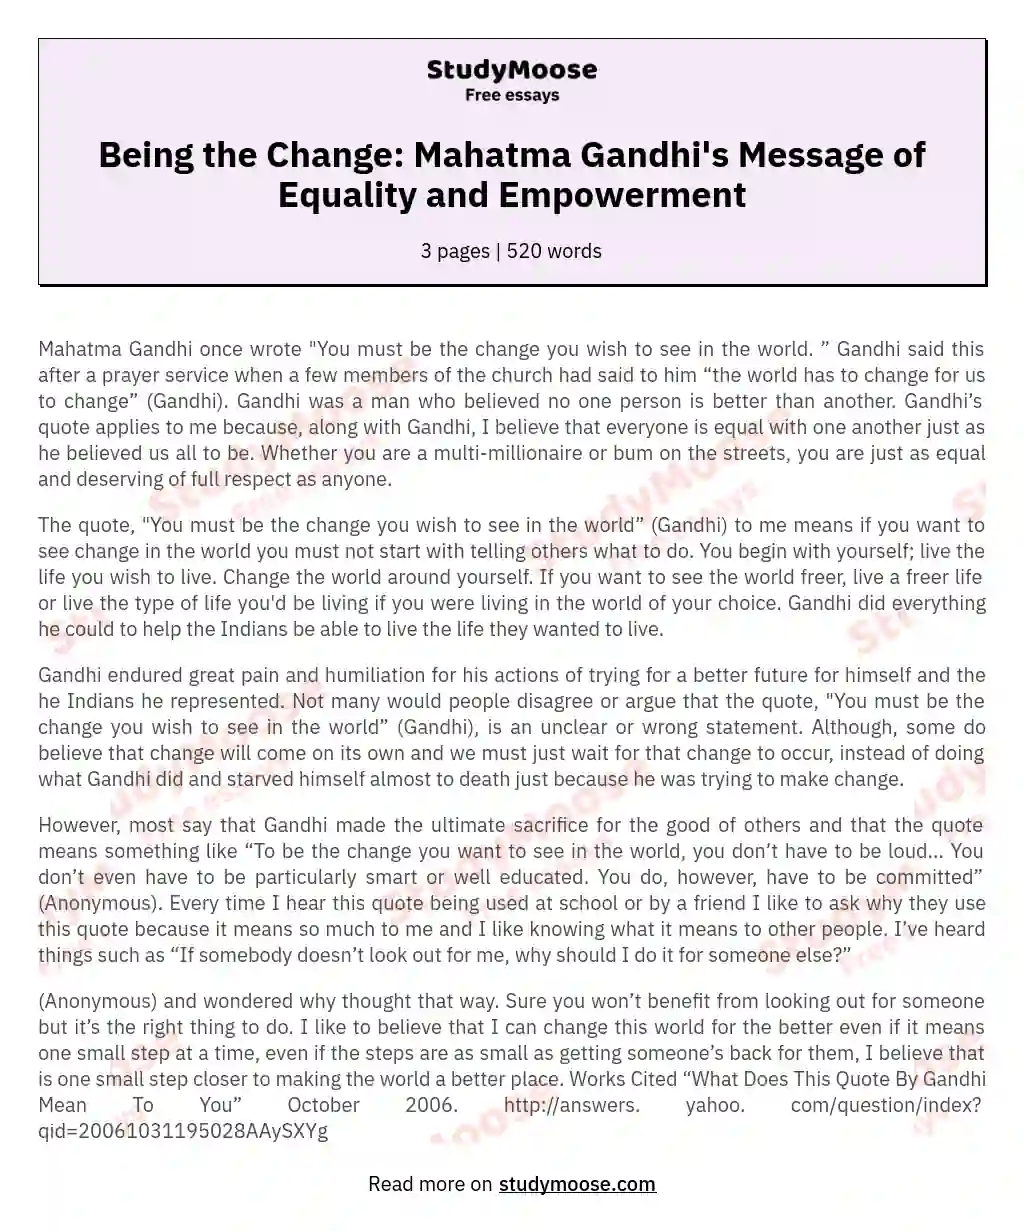 Being the Change: Mahatma Gandhi's Message of Equality and Empowerment essay